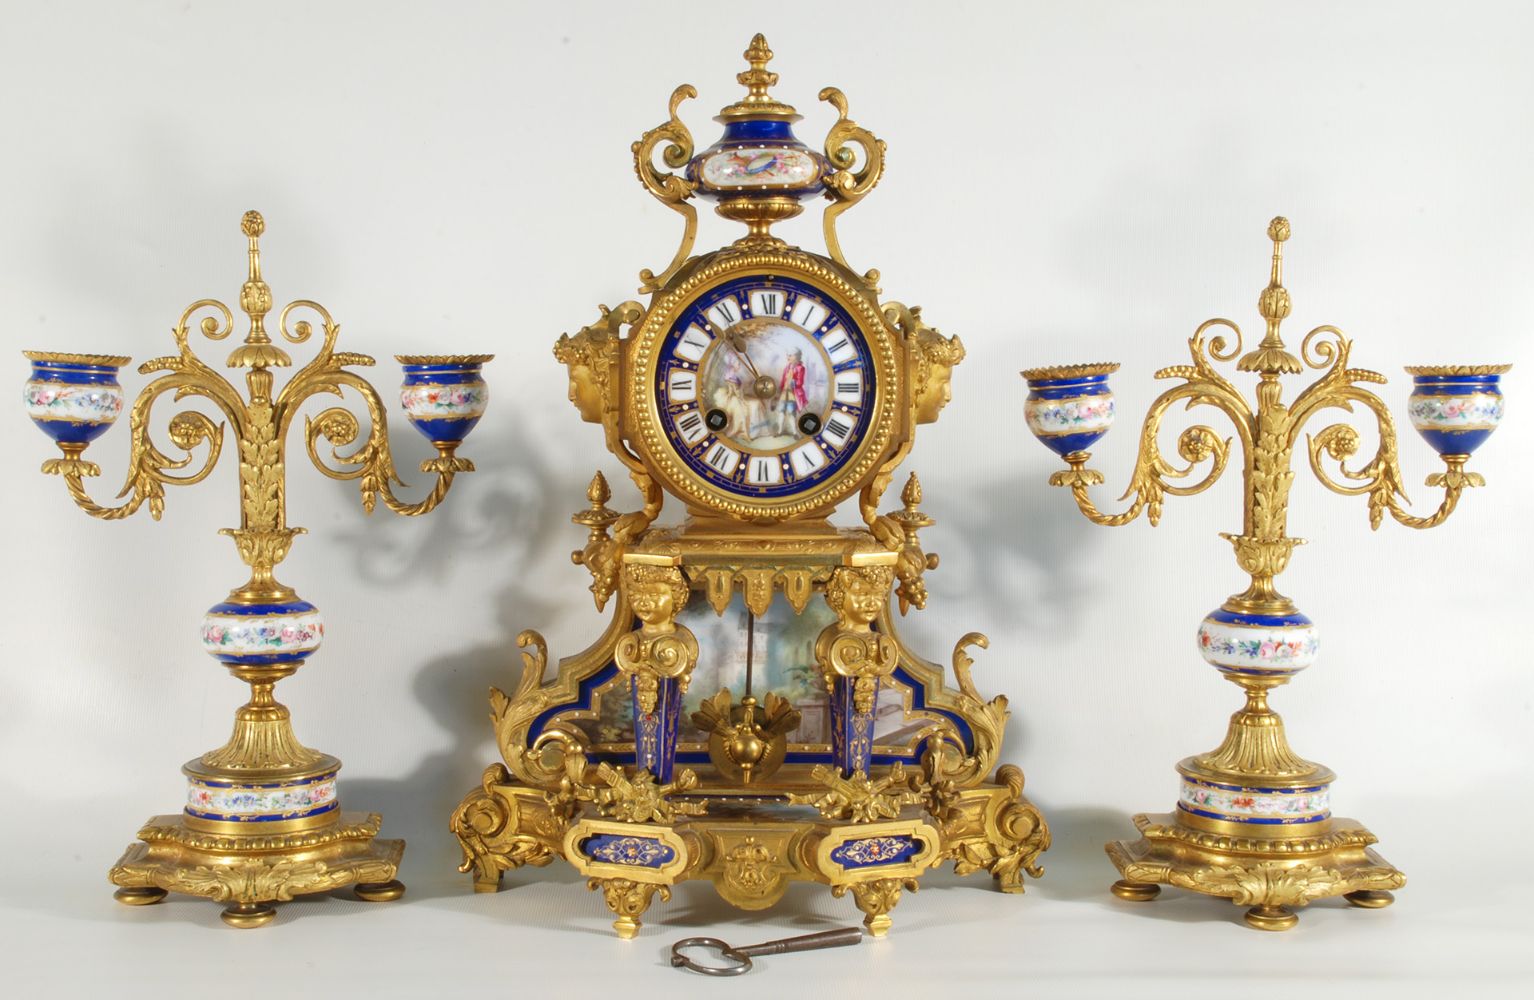 Online Only June Auction of Miscellaneous Objets d'Art, Collectables, Porcelain, Glass, Antique & Country Furniture